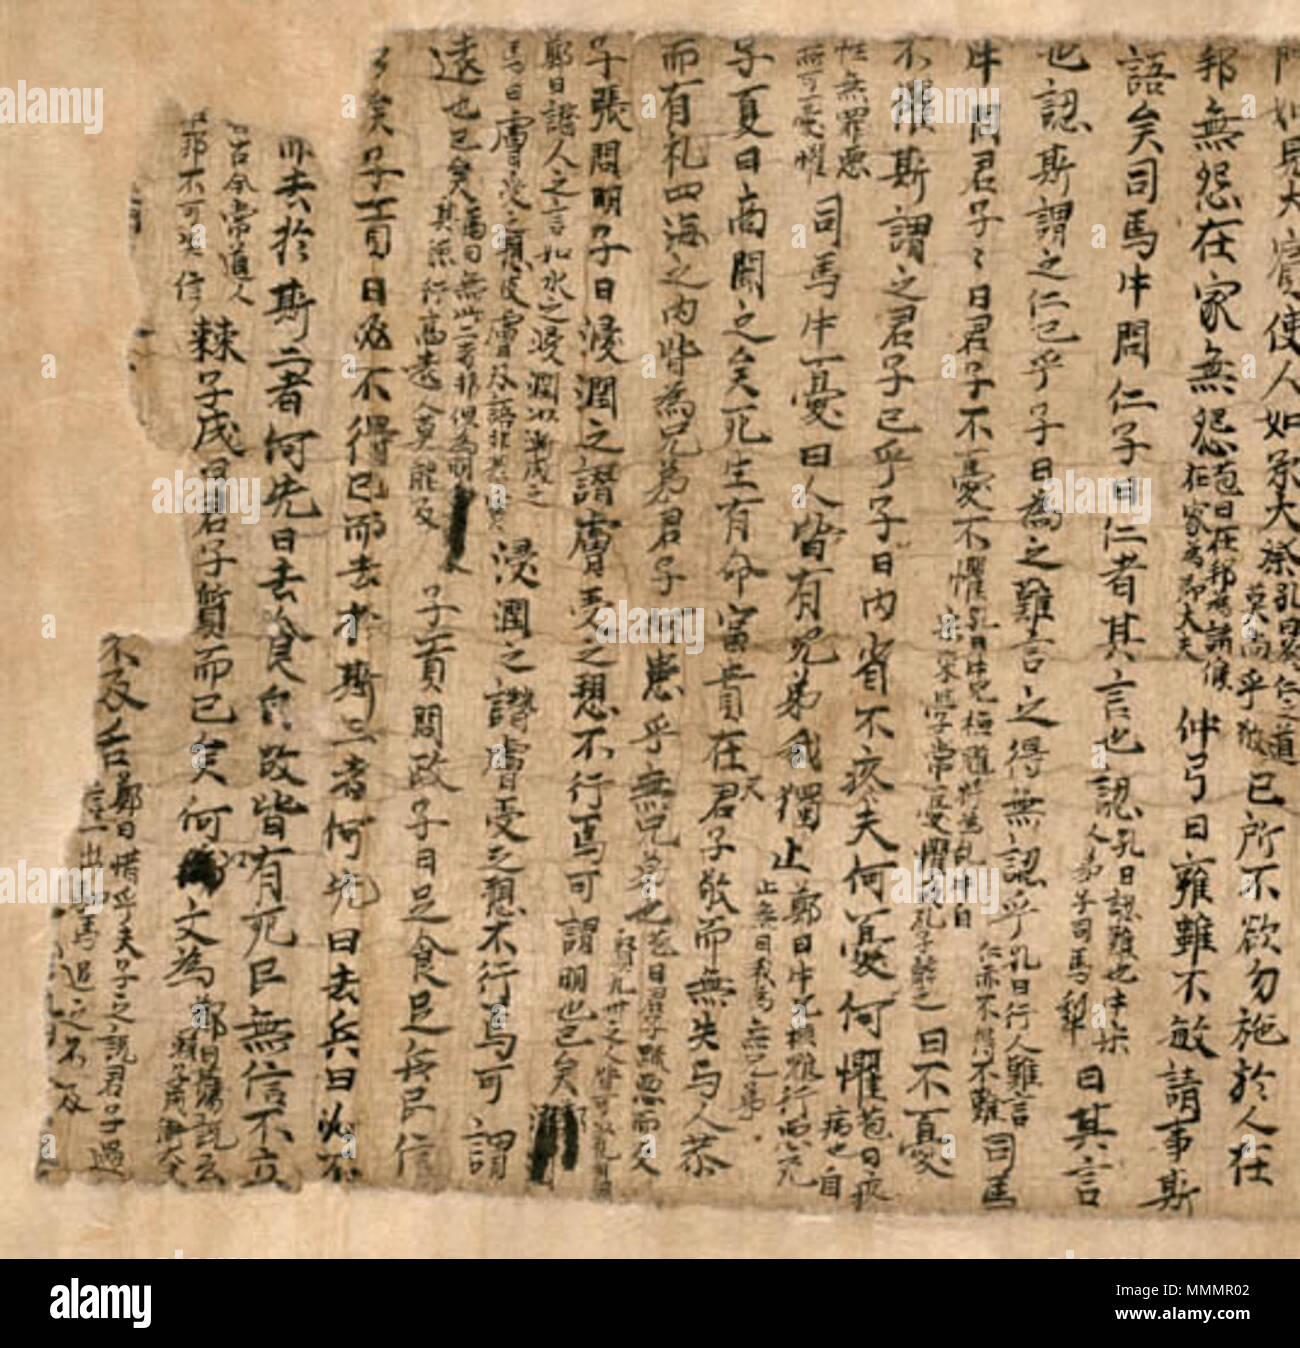 . English: Analects of Confucius, from the Mogao Caves in Dunhuang, China  . Unknown date. Unknown 43 Analects from Dunhuang Stock Photo